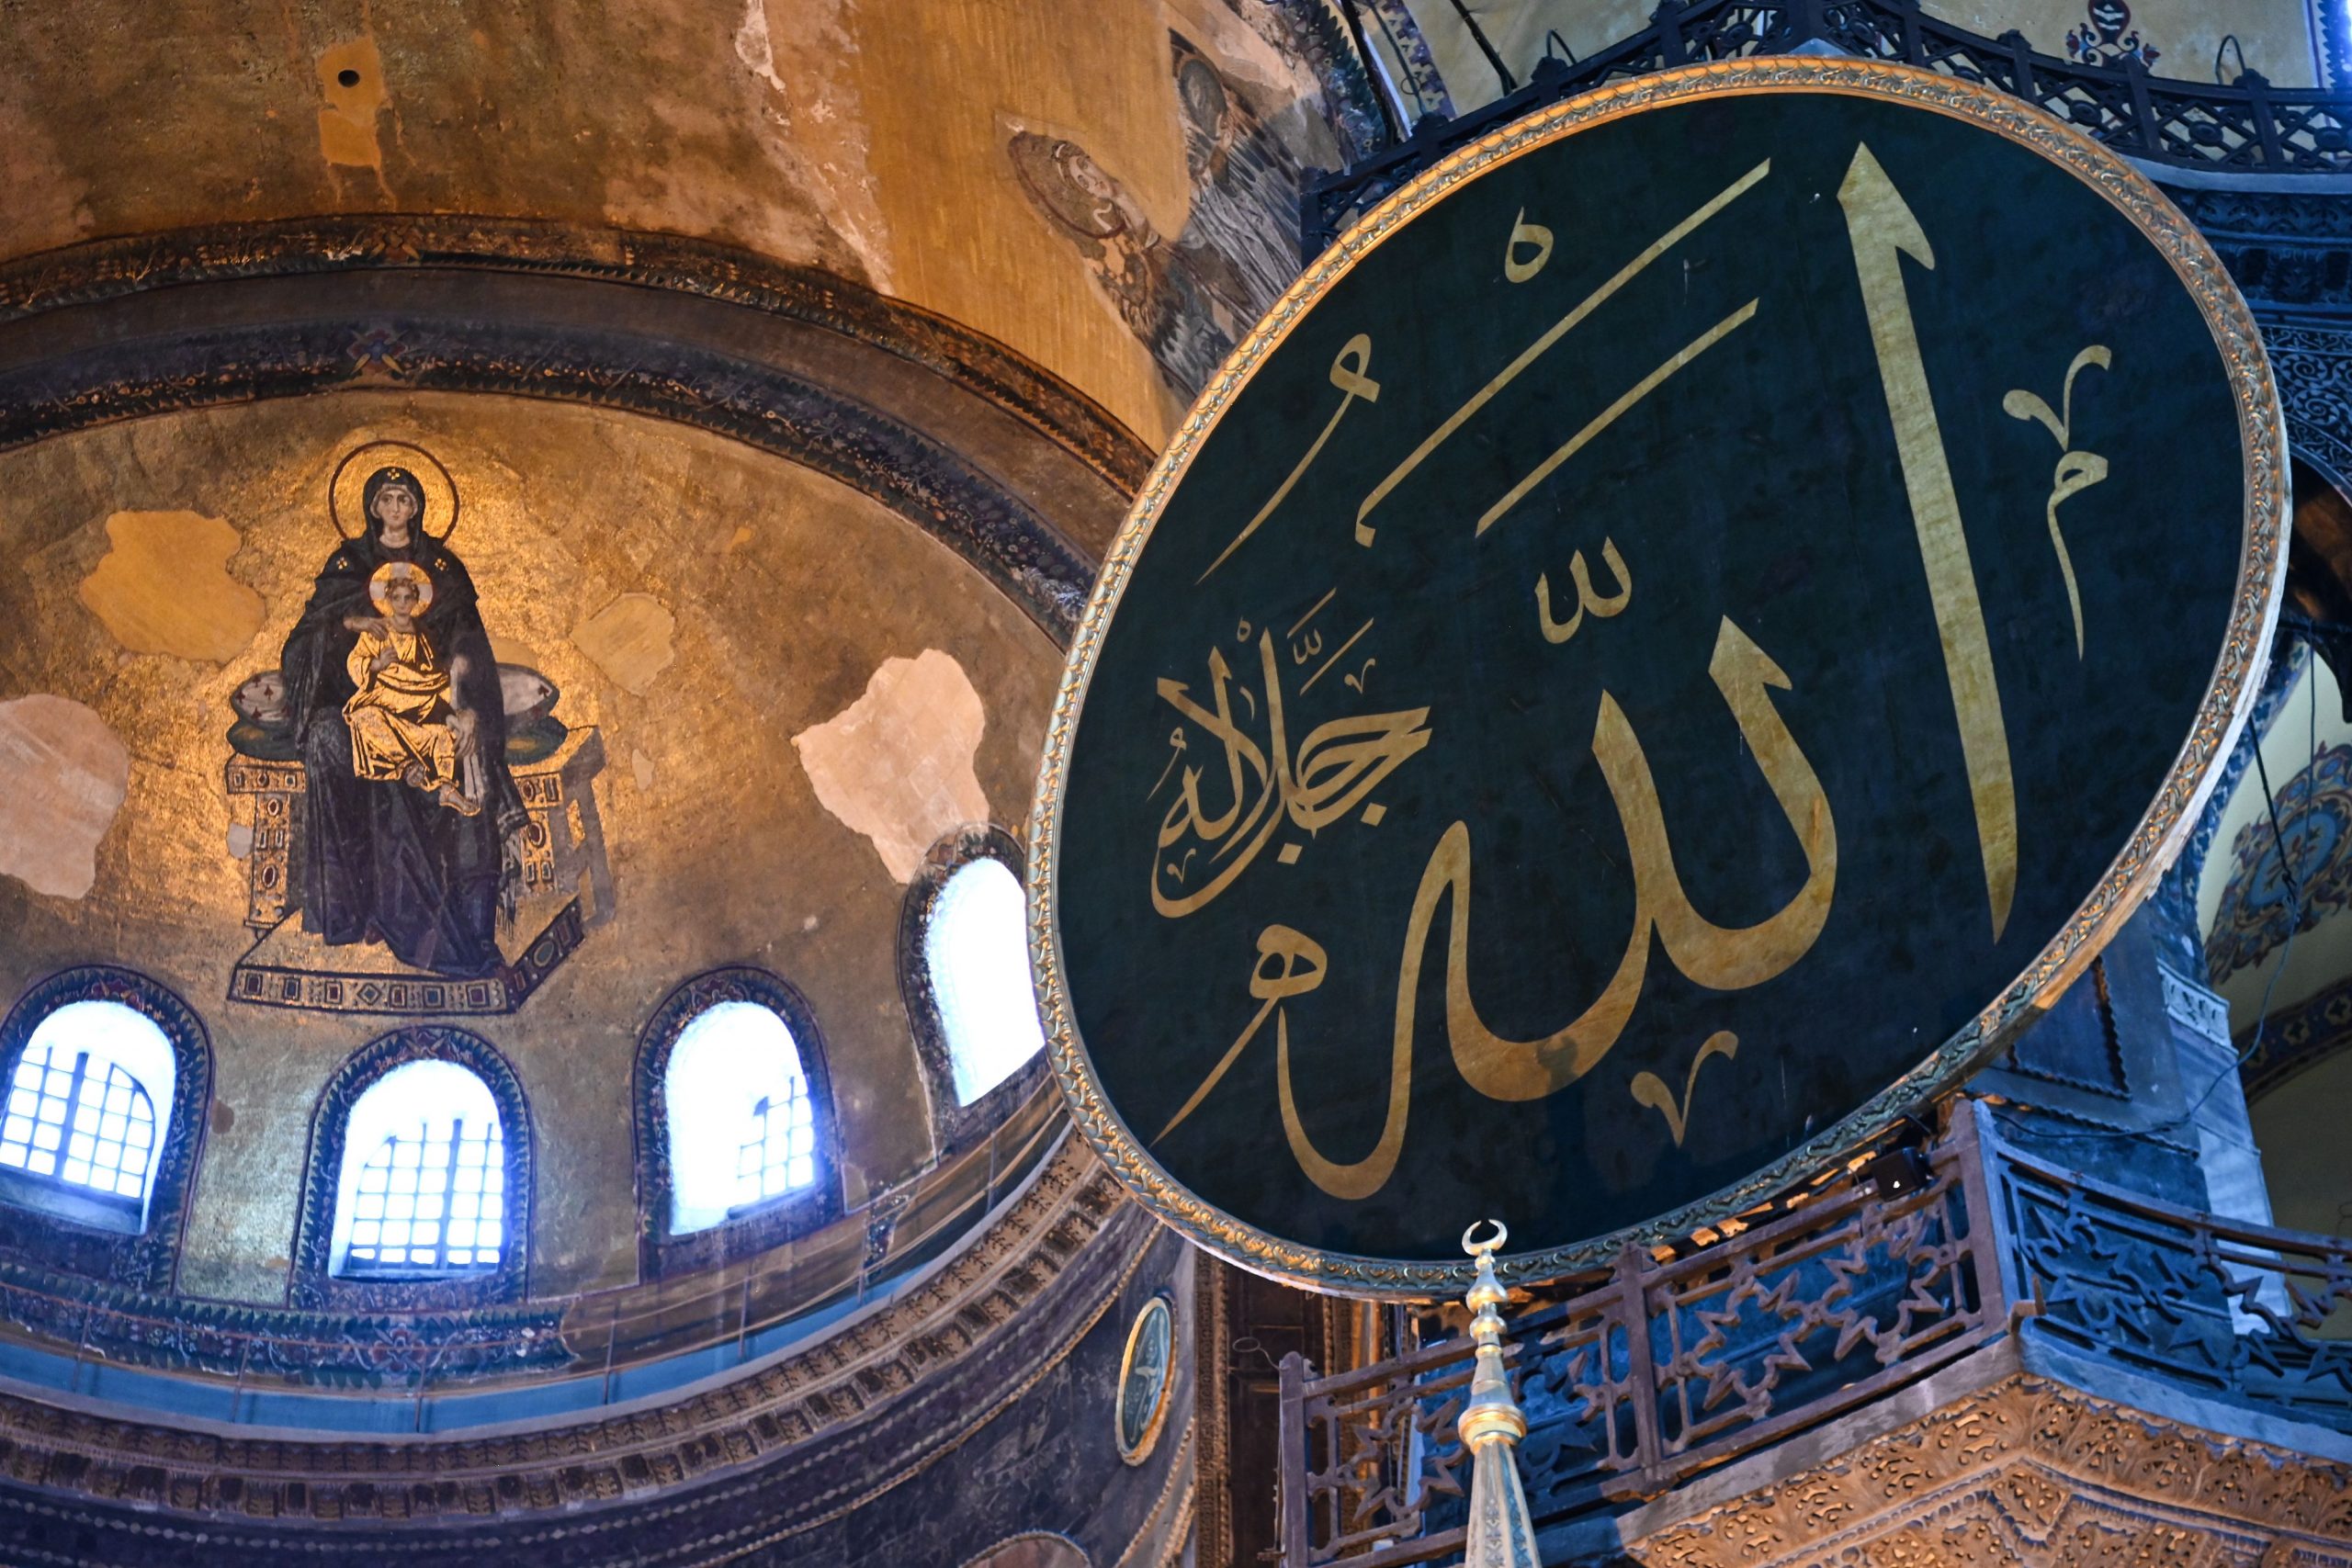 Violent Turkey if the Hagia Sophia in Istanbul in a museum or a mosque